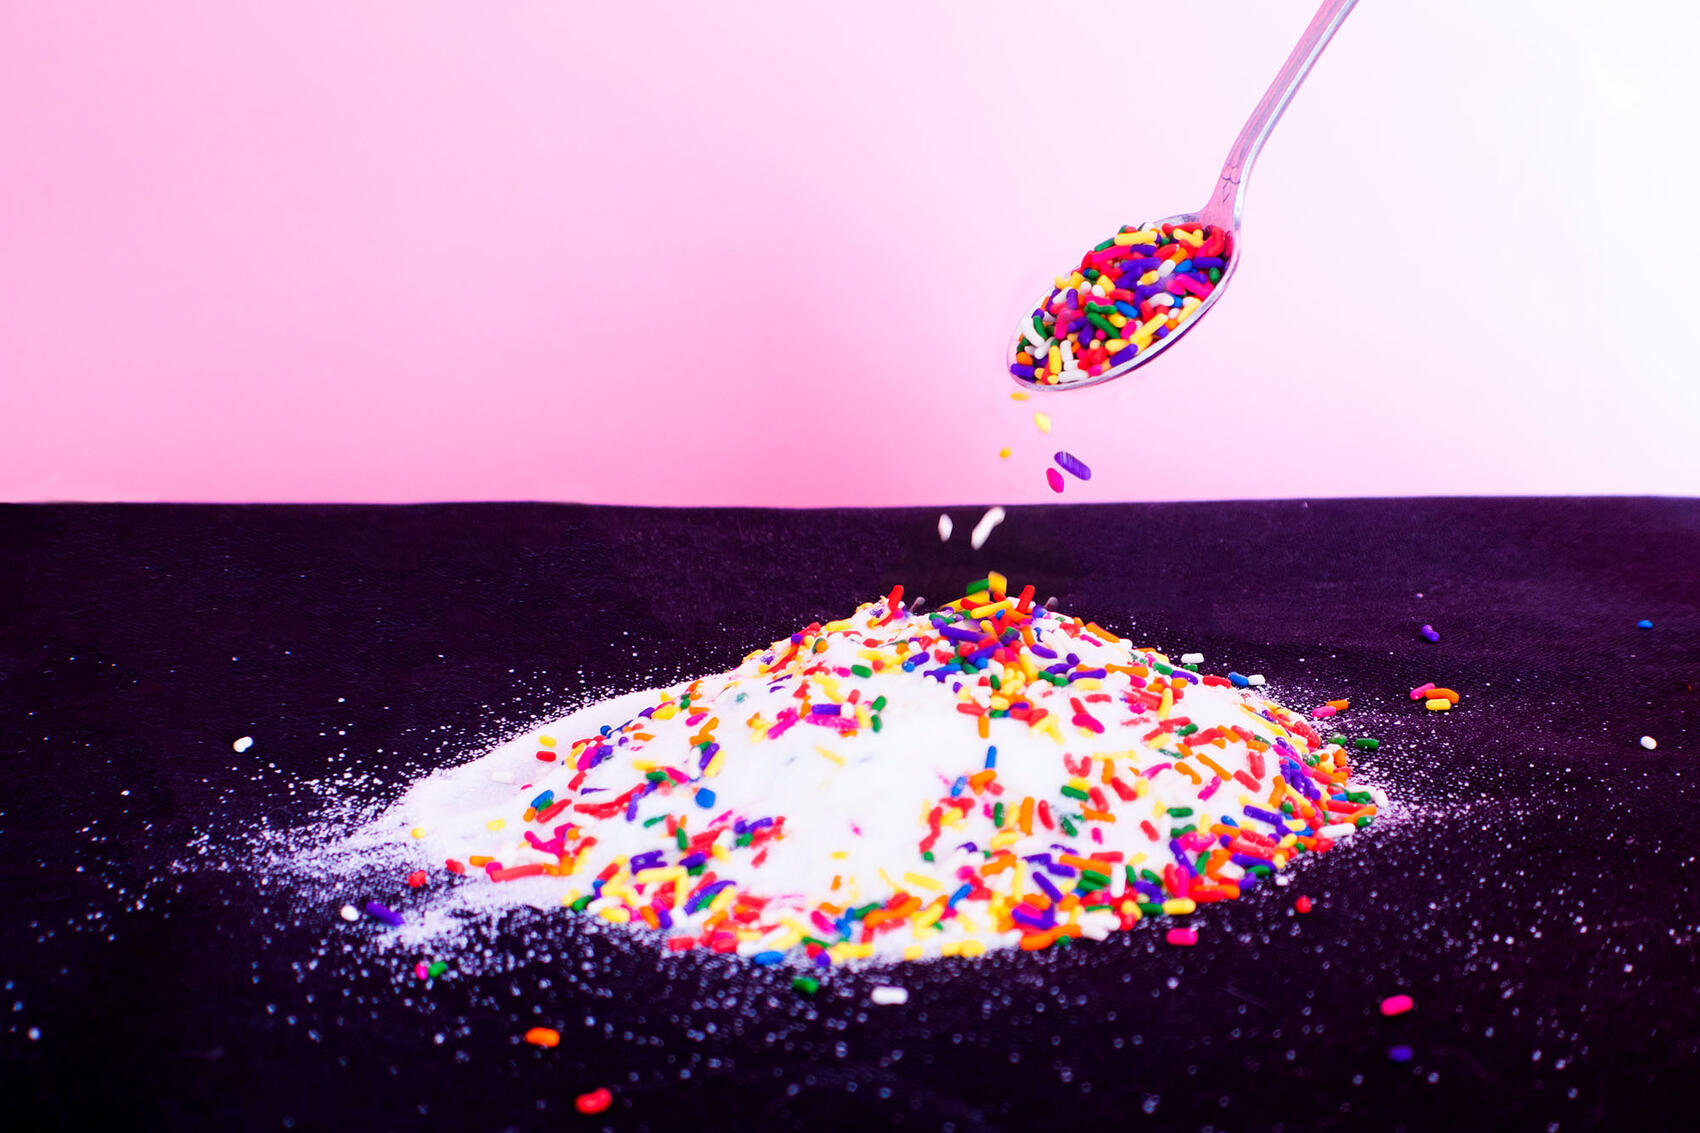 Newswise: Is Sweetness Your Weakness? A Dietitian’s Guide to Giving Up Sugar